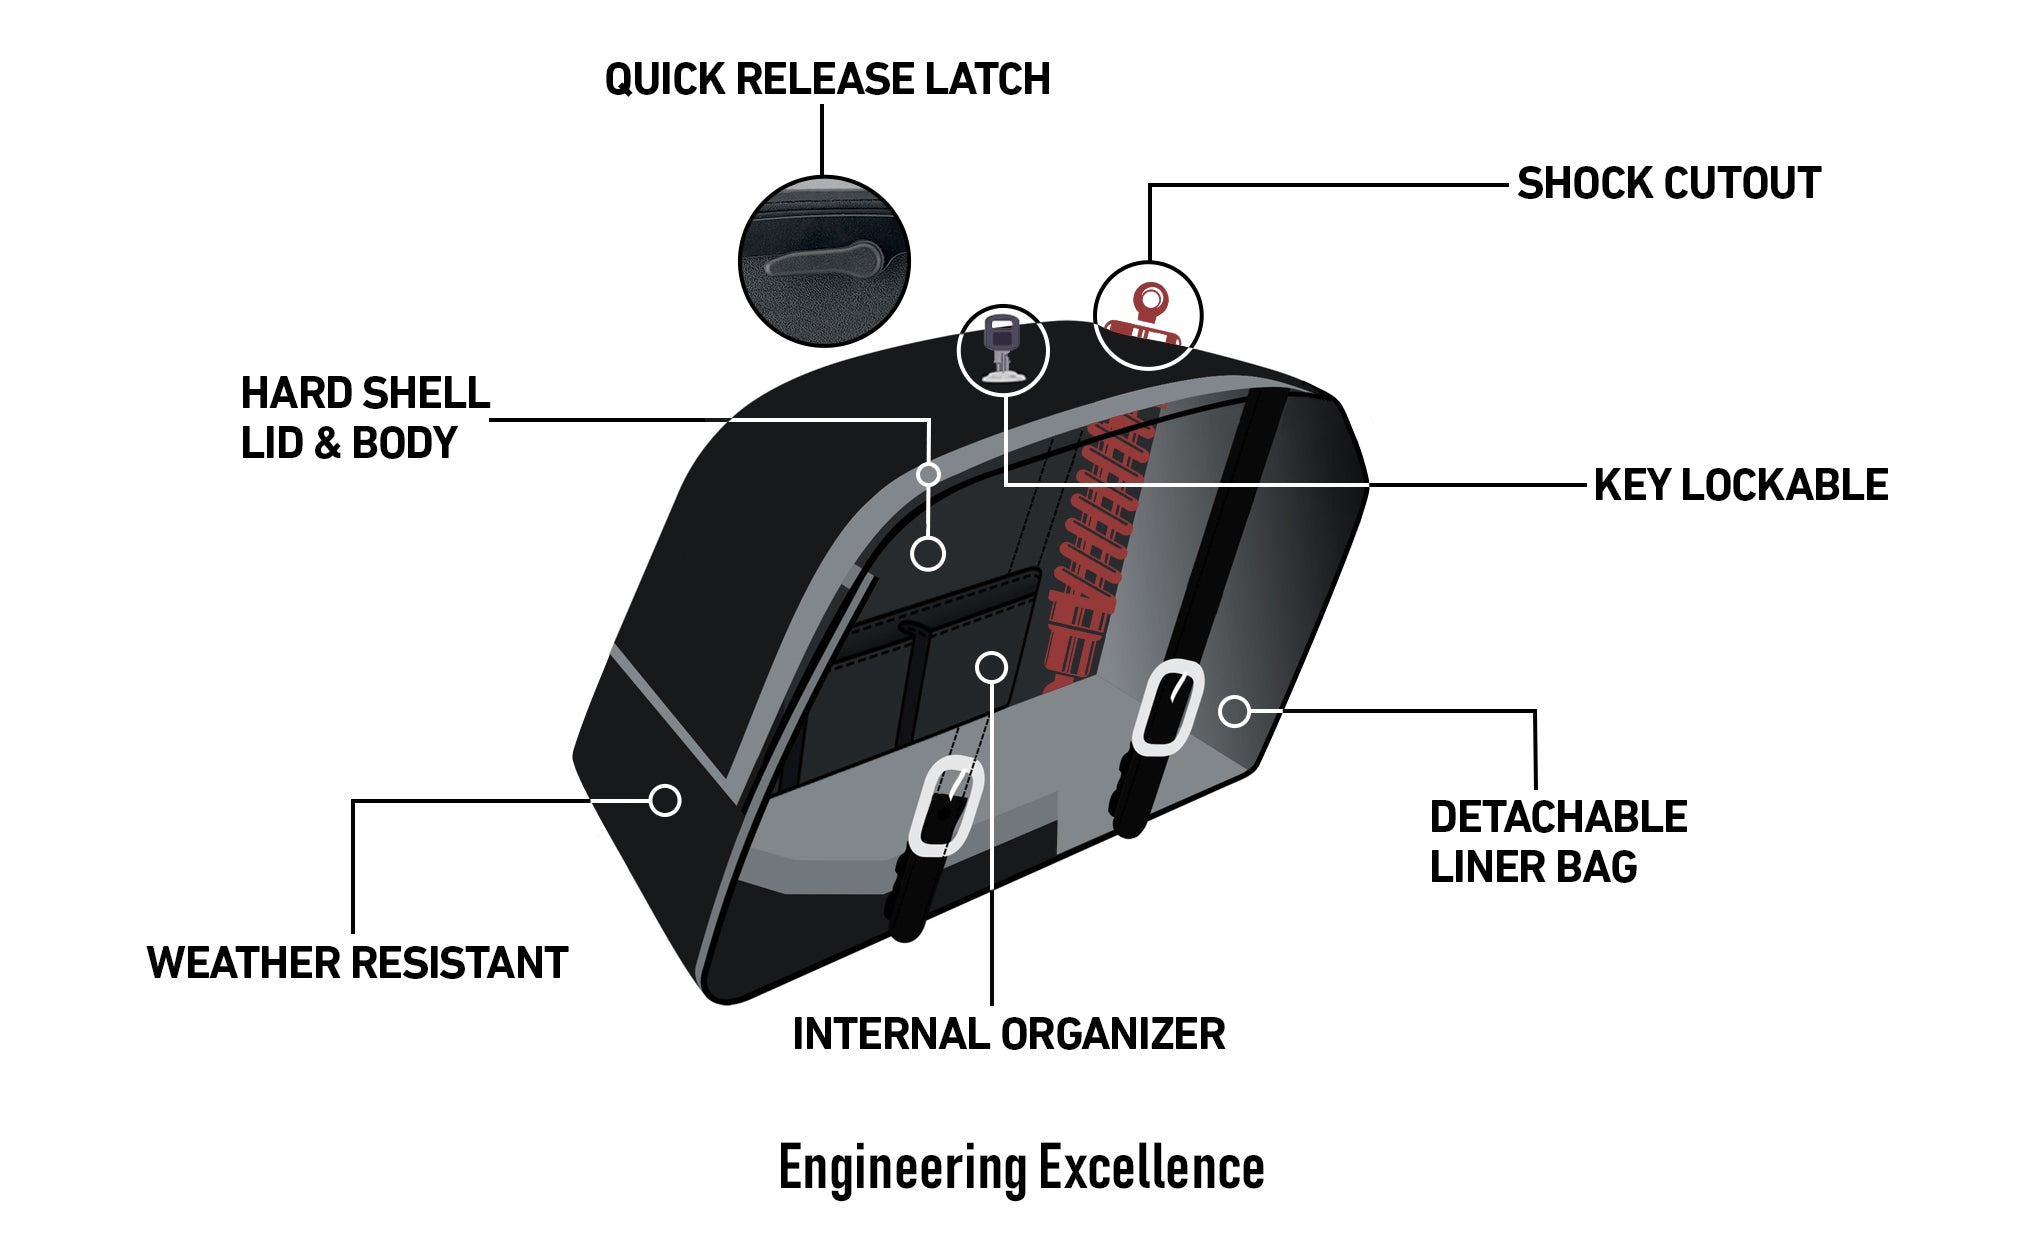 Viking Baldur Extra Large Shock Cut Out Painted Motorcycle Hard Saddlebags For Harley Dyna Wide Glide Fxdwg I Engineering Excellence with Bag on Bike @expand